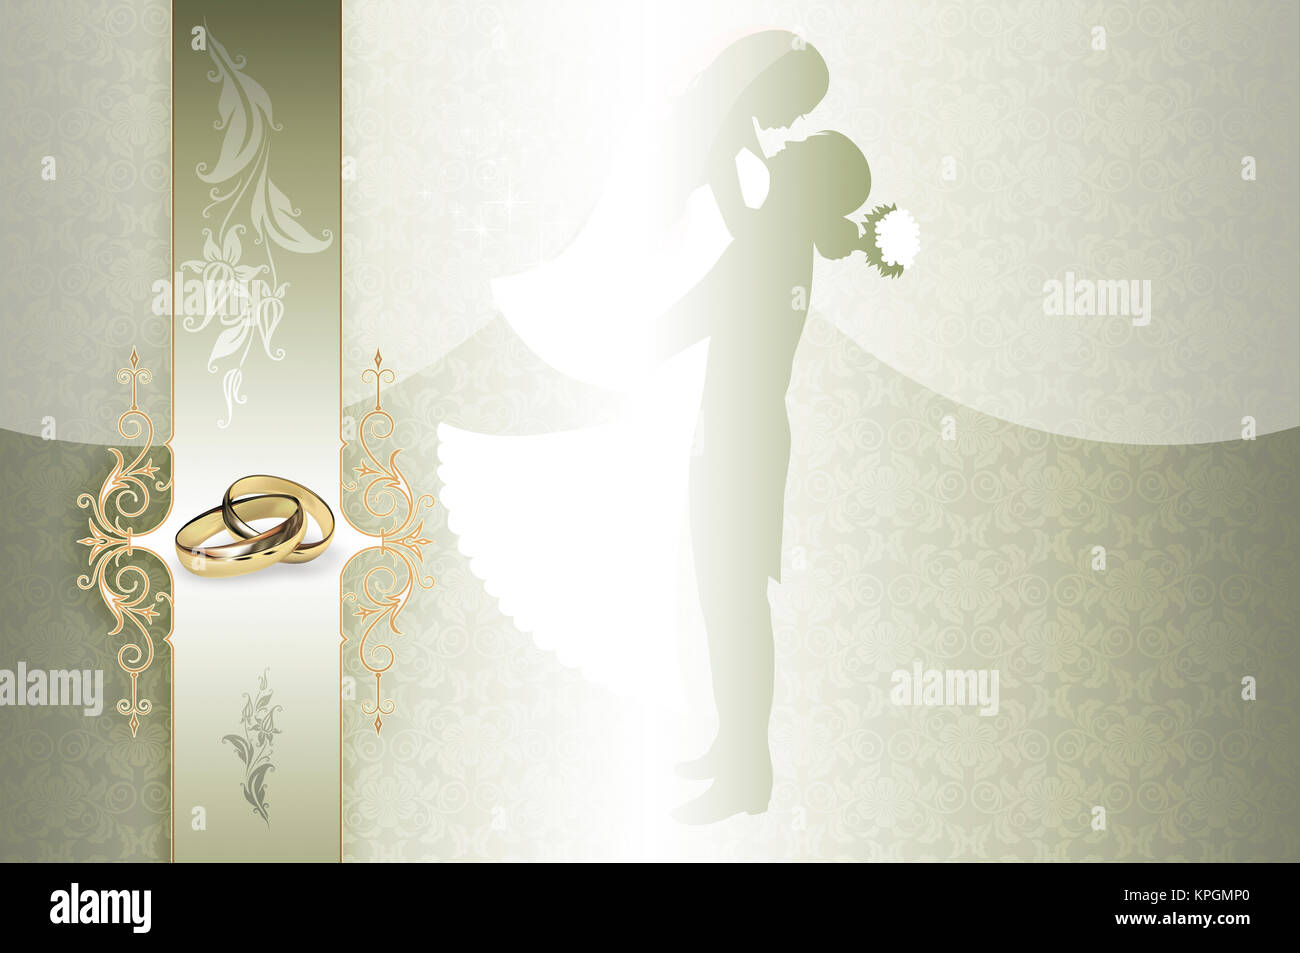 Decorative wedding background with gold rings,silhouette of newlyweds and  floral patterns Stock Photo - Alamy